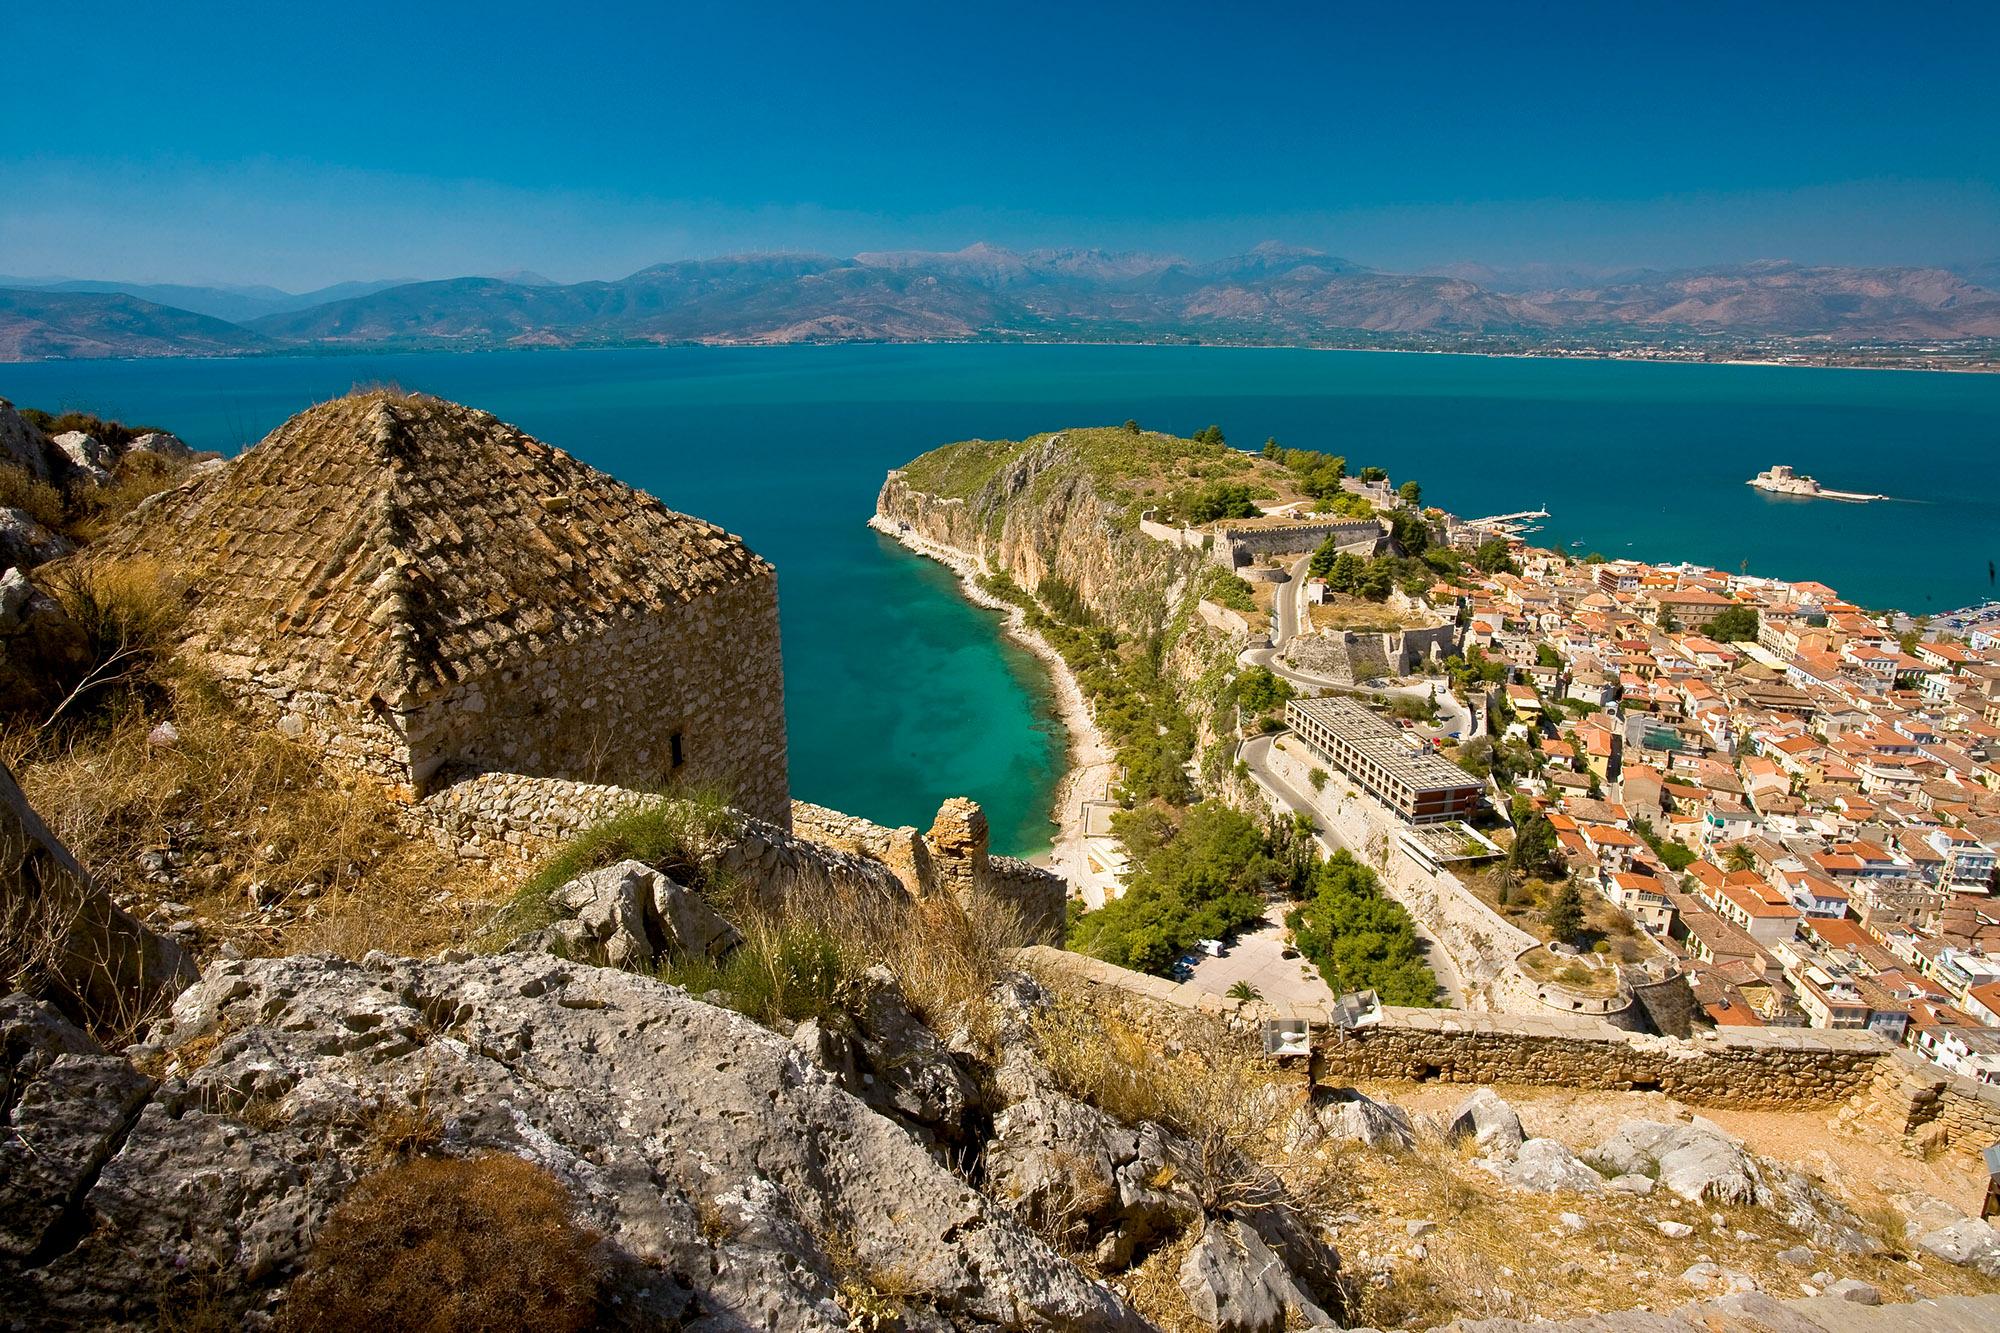 Rising above the old part of town, the Akronafplia fortress is the oldest of Nafplio's three castles. – © G. Filippini / Ministry of Tourism